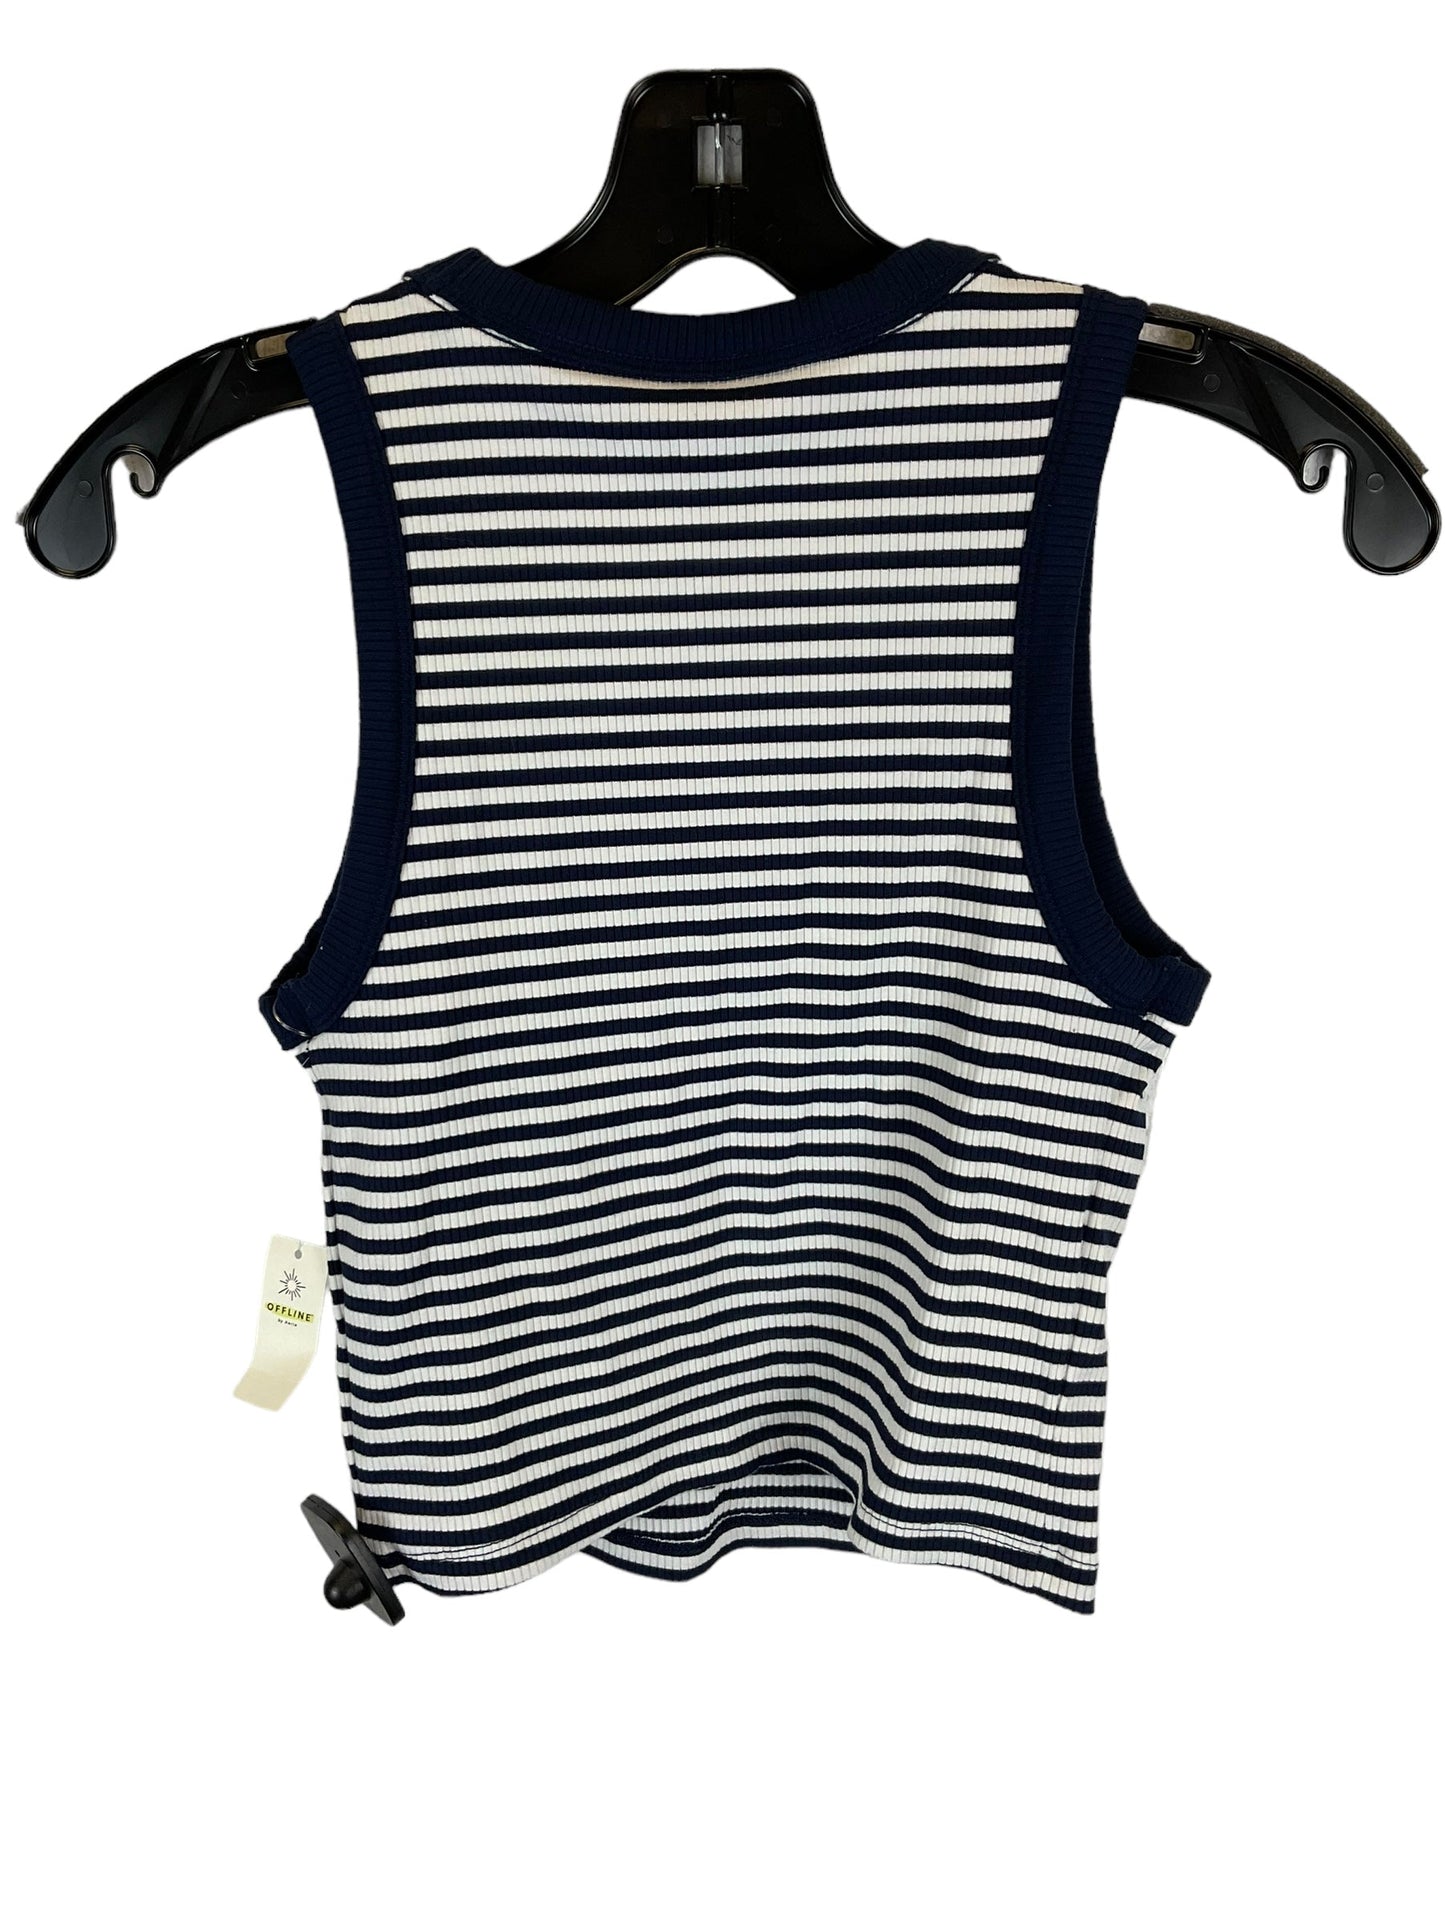 Striped Pattern Top Sleeveless Aerie, Size Xs